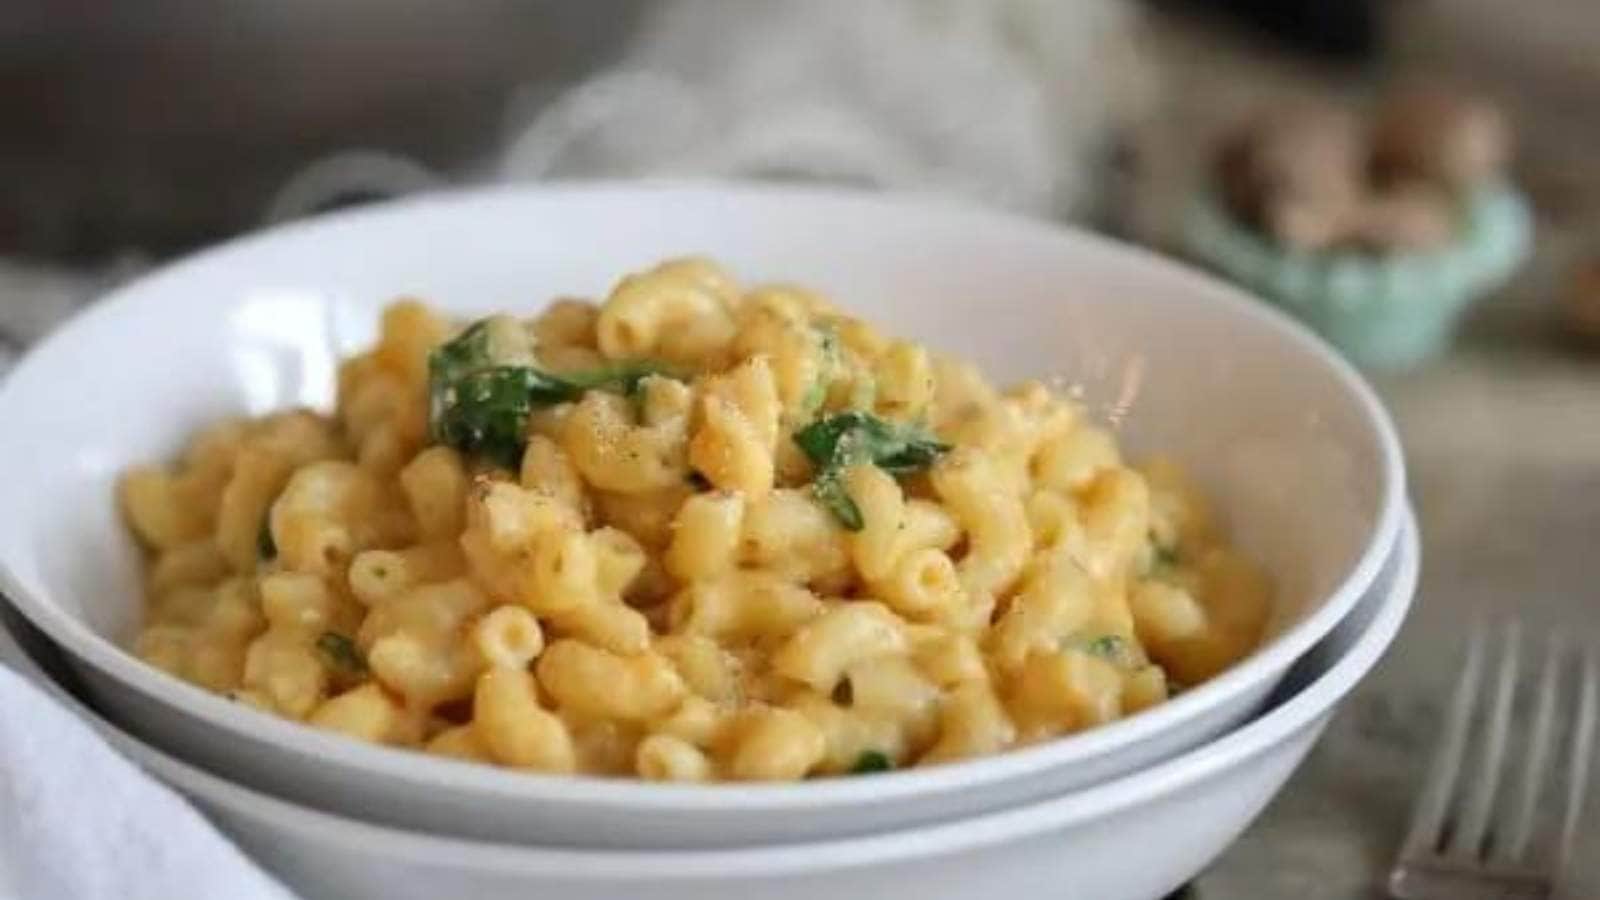 Sweet Potato Mac And Cheese With Spinach recipe by Running To The Kitchen.